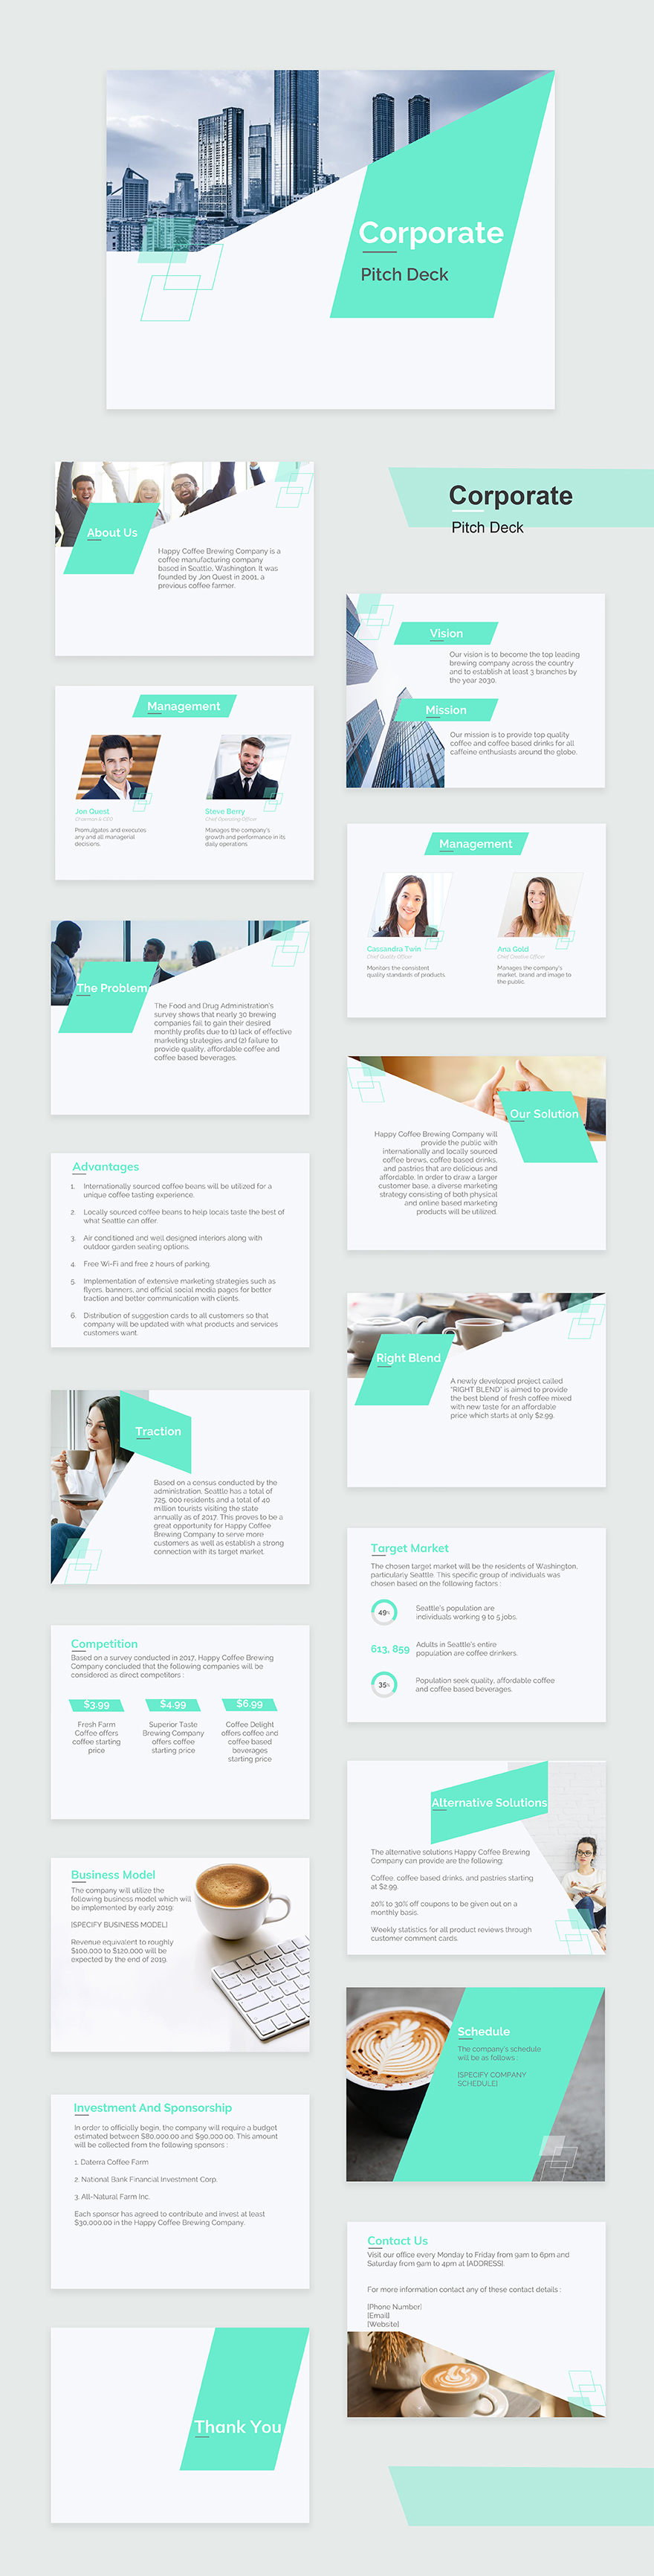 medical-pitch-deck-template-apple-keynote-powerpoint-template